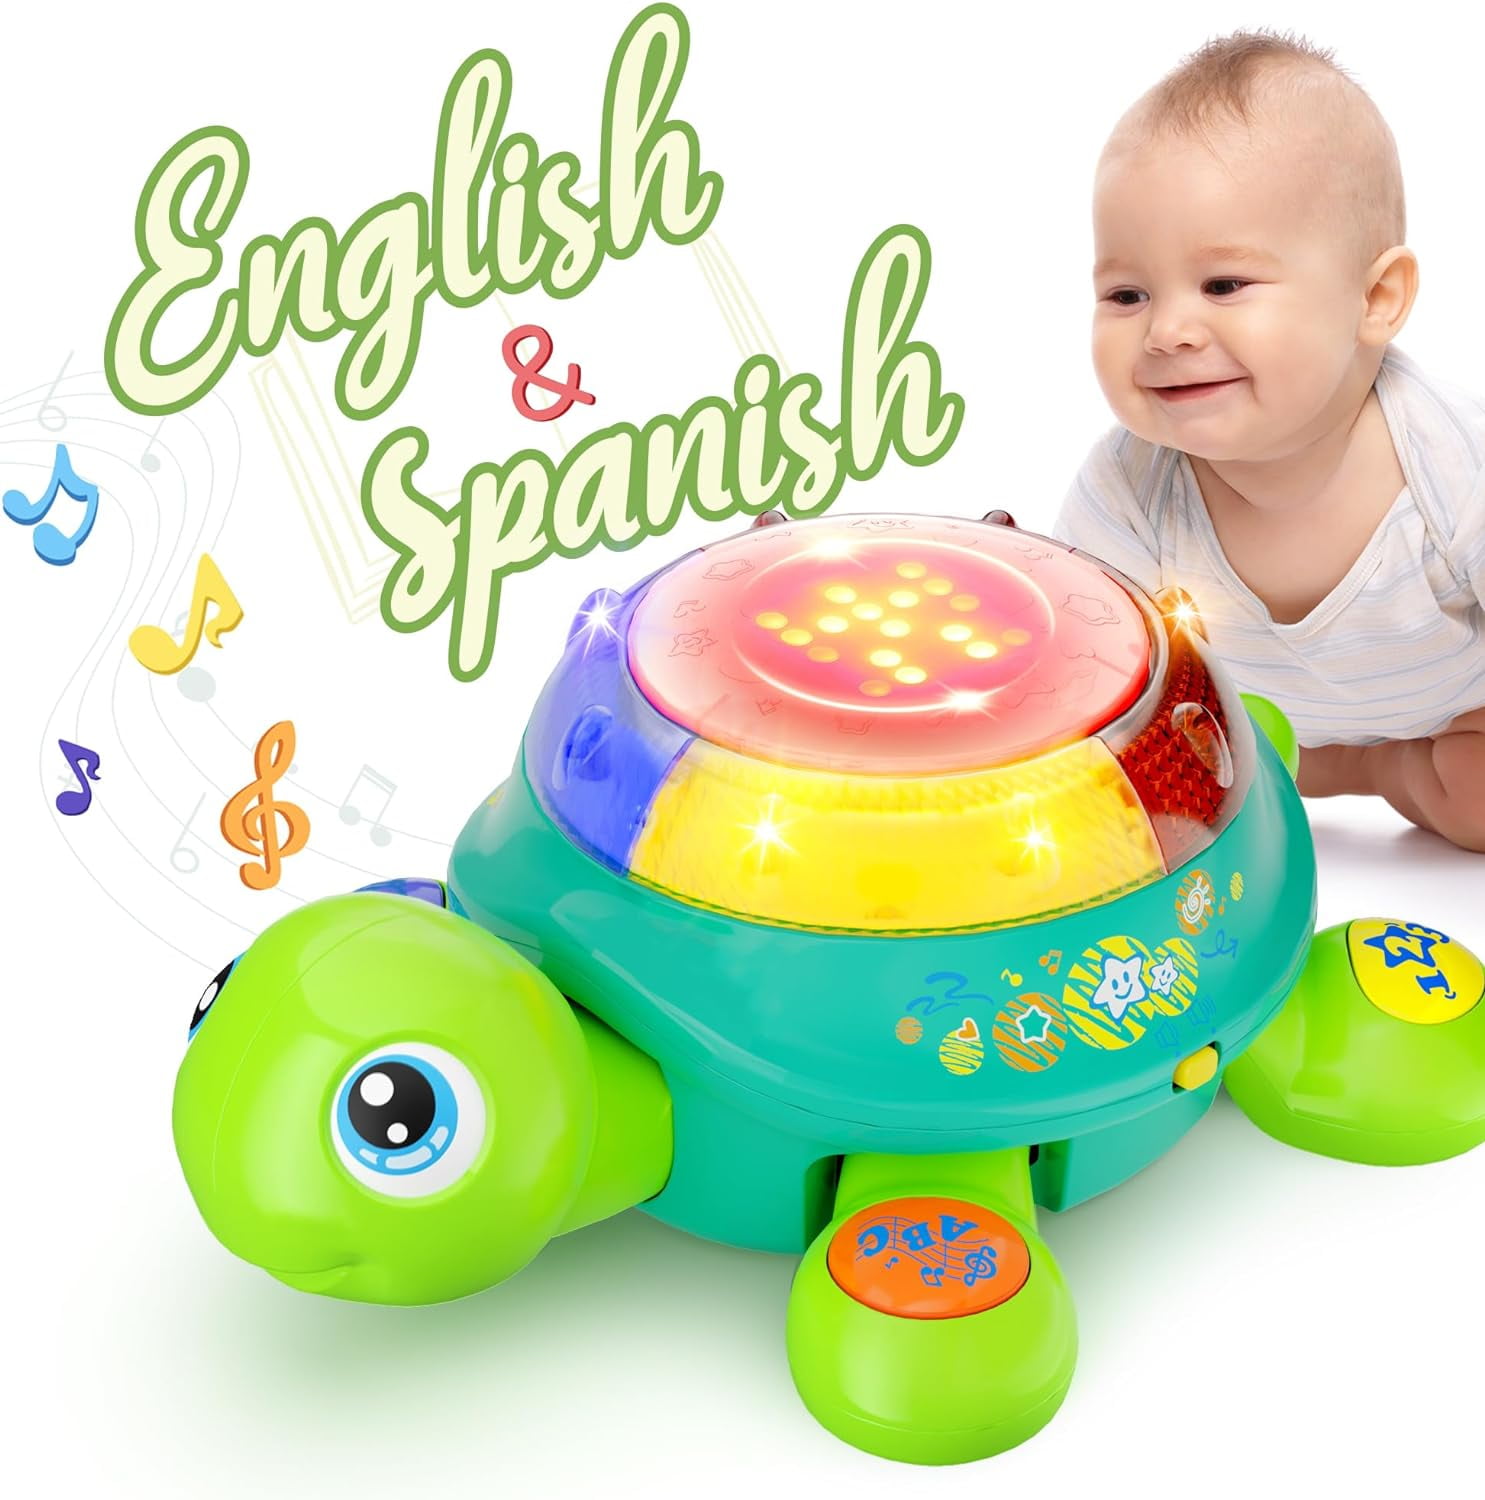 PLAY Baby Controller Toy - Bilingual Spanish & English Learning